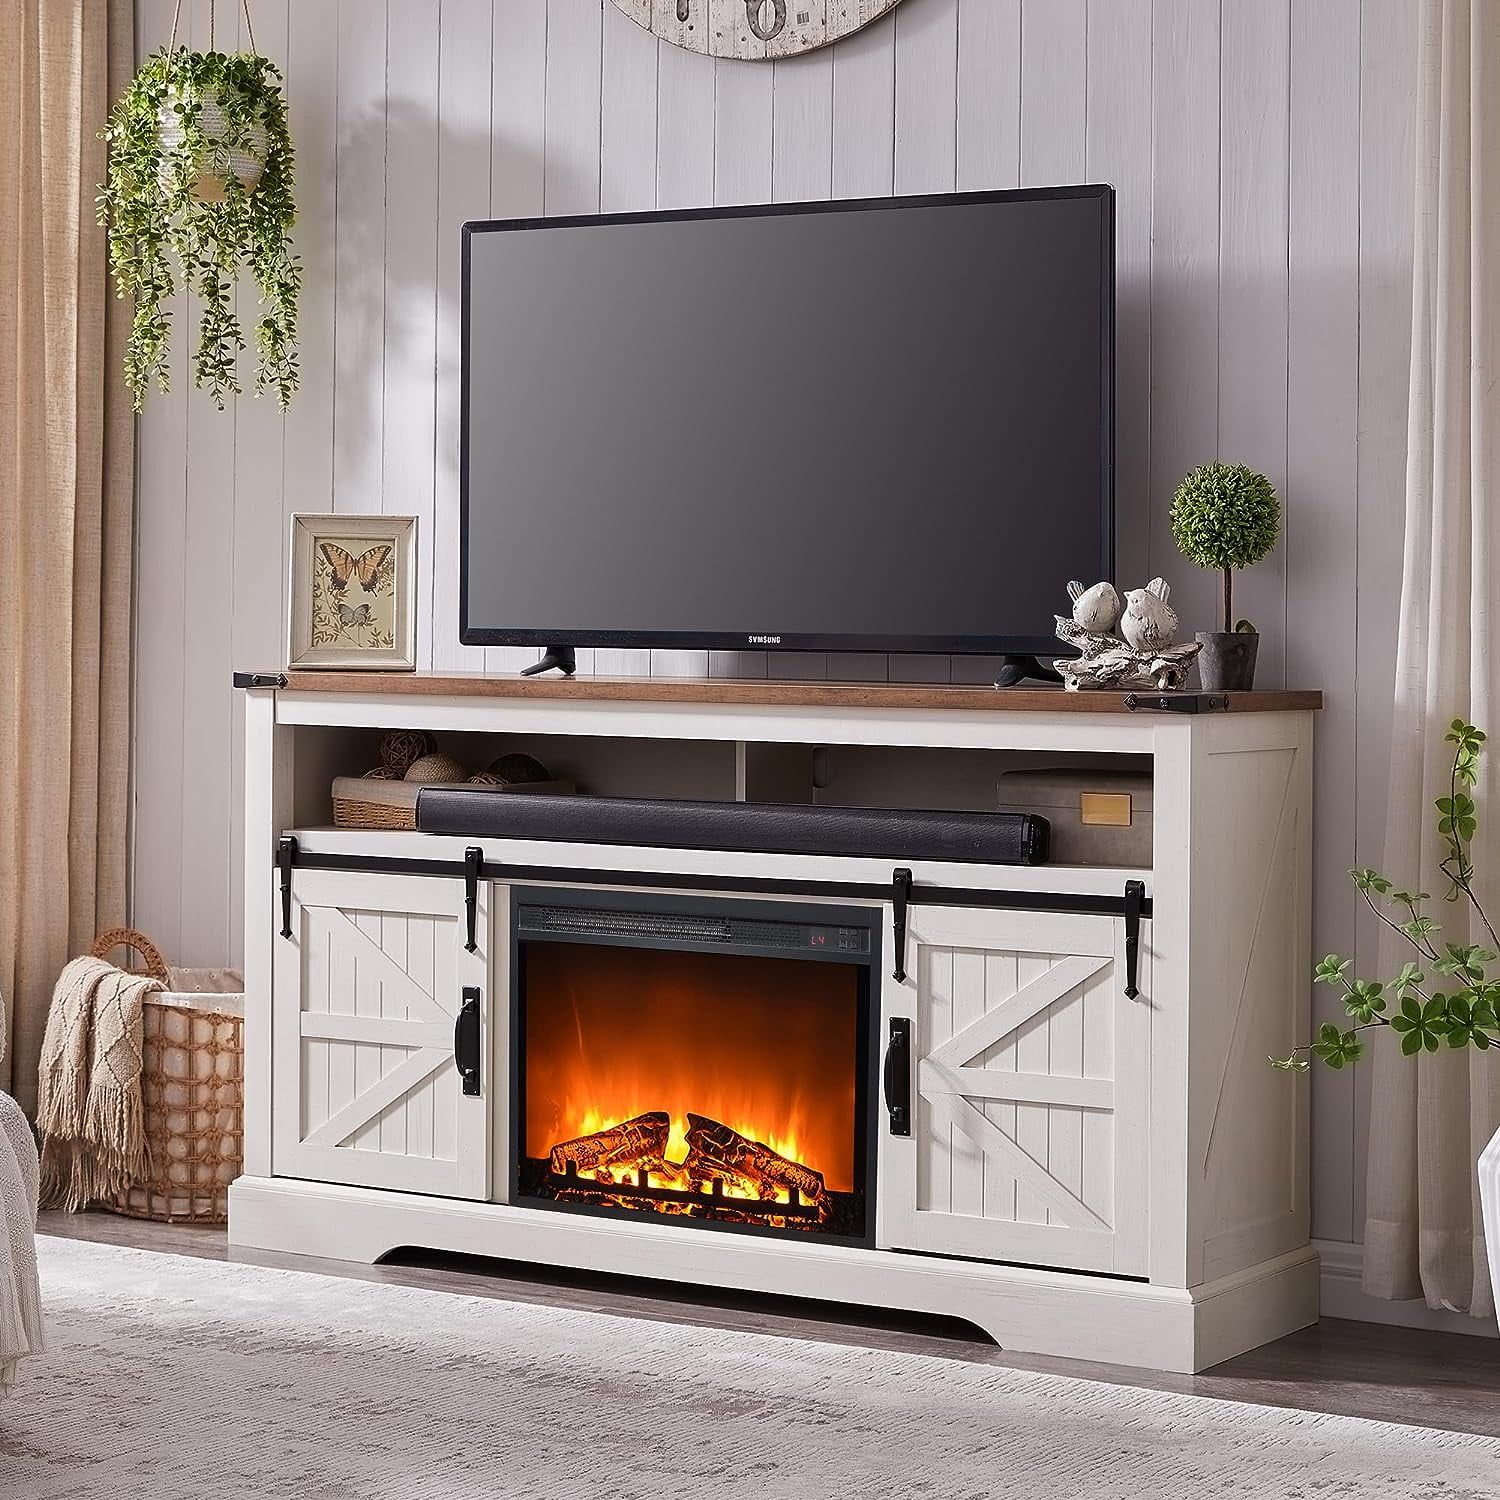 Okd Farmhouse 60" Electric Fireplace Tv Stand For Tvs Up To 65", Large Entertainment  Center With Fireplace For Living Room, Bedroom, Antique White – Walmart In Tv Stands With Electric Fireplace (View 8 of 15)